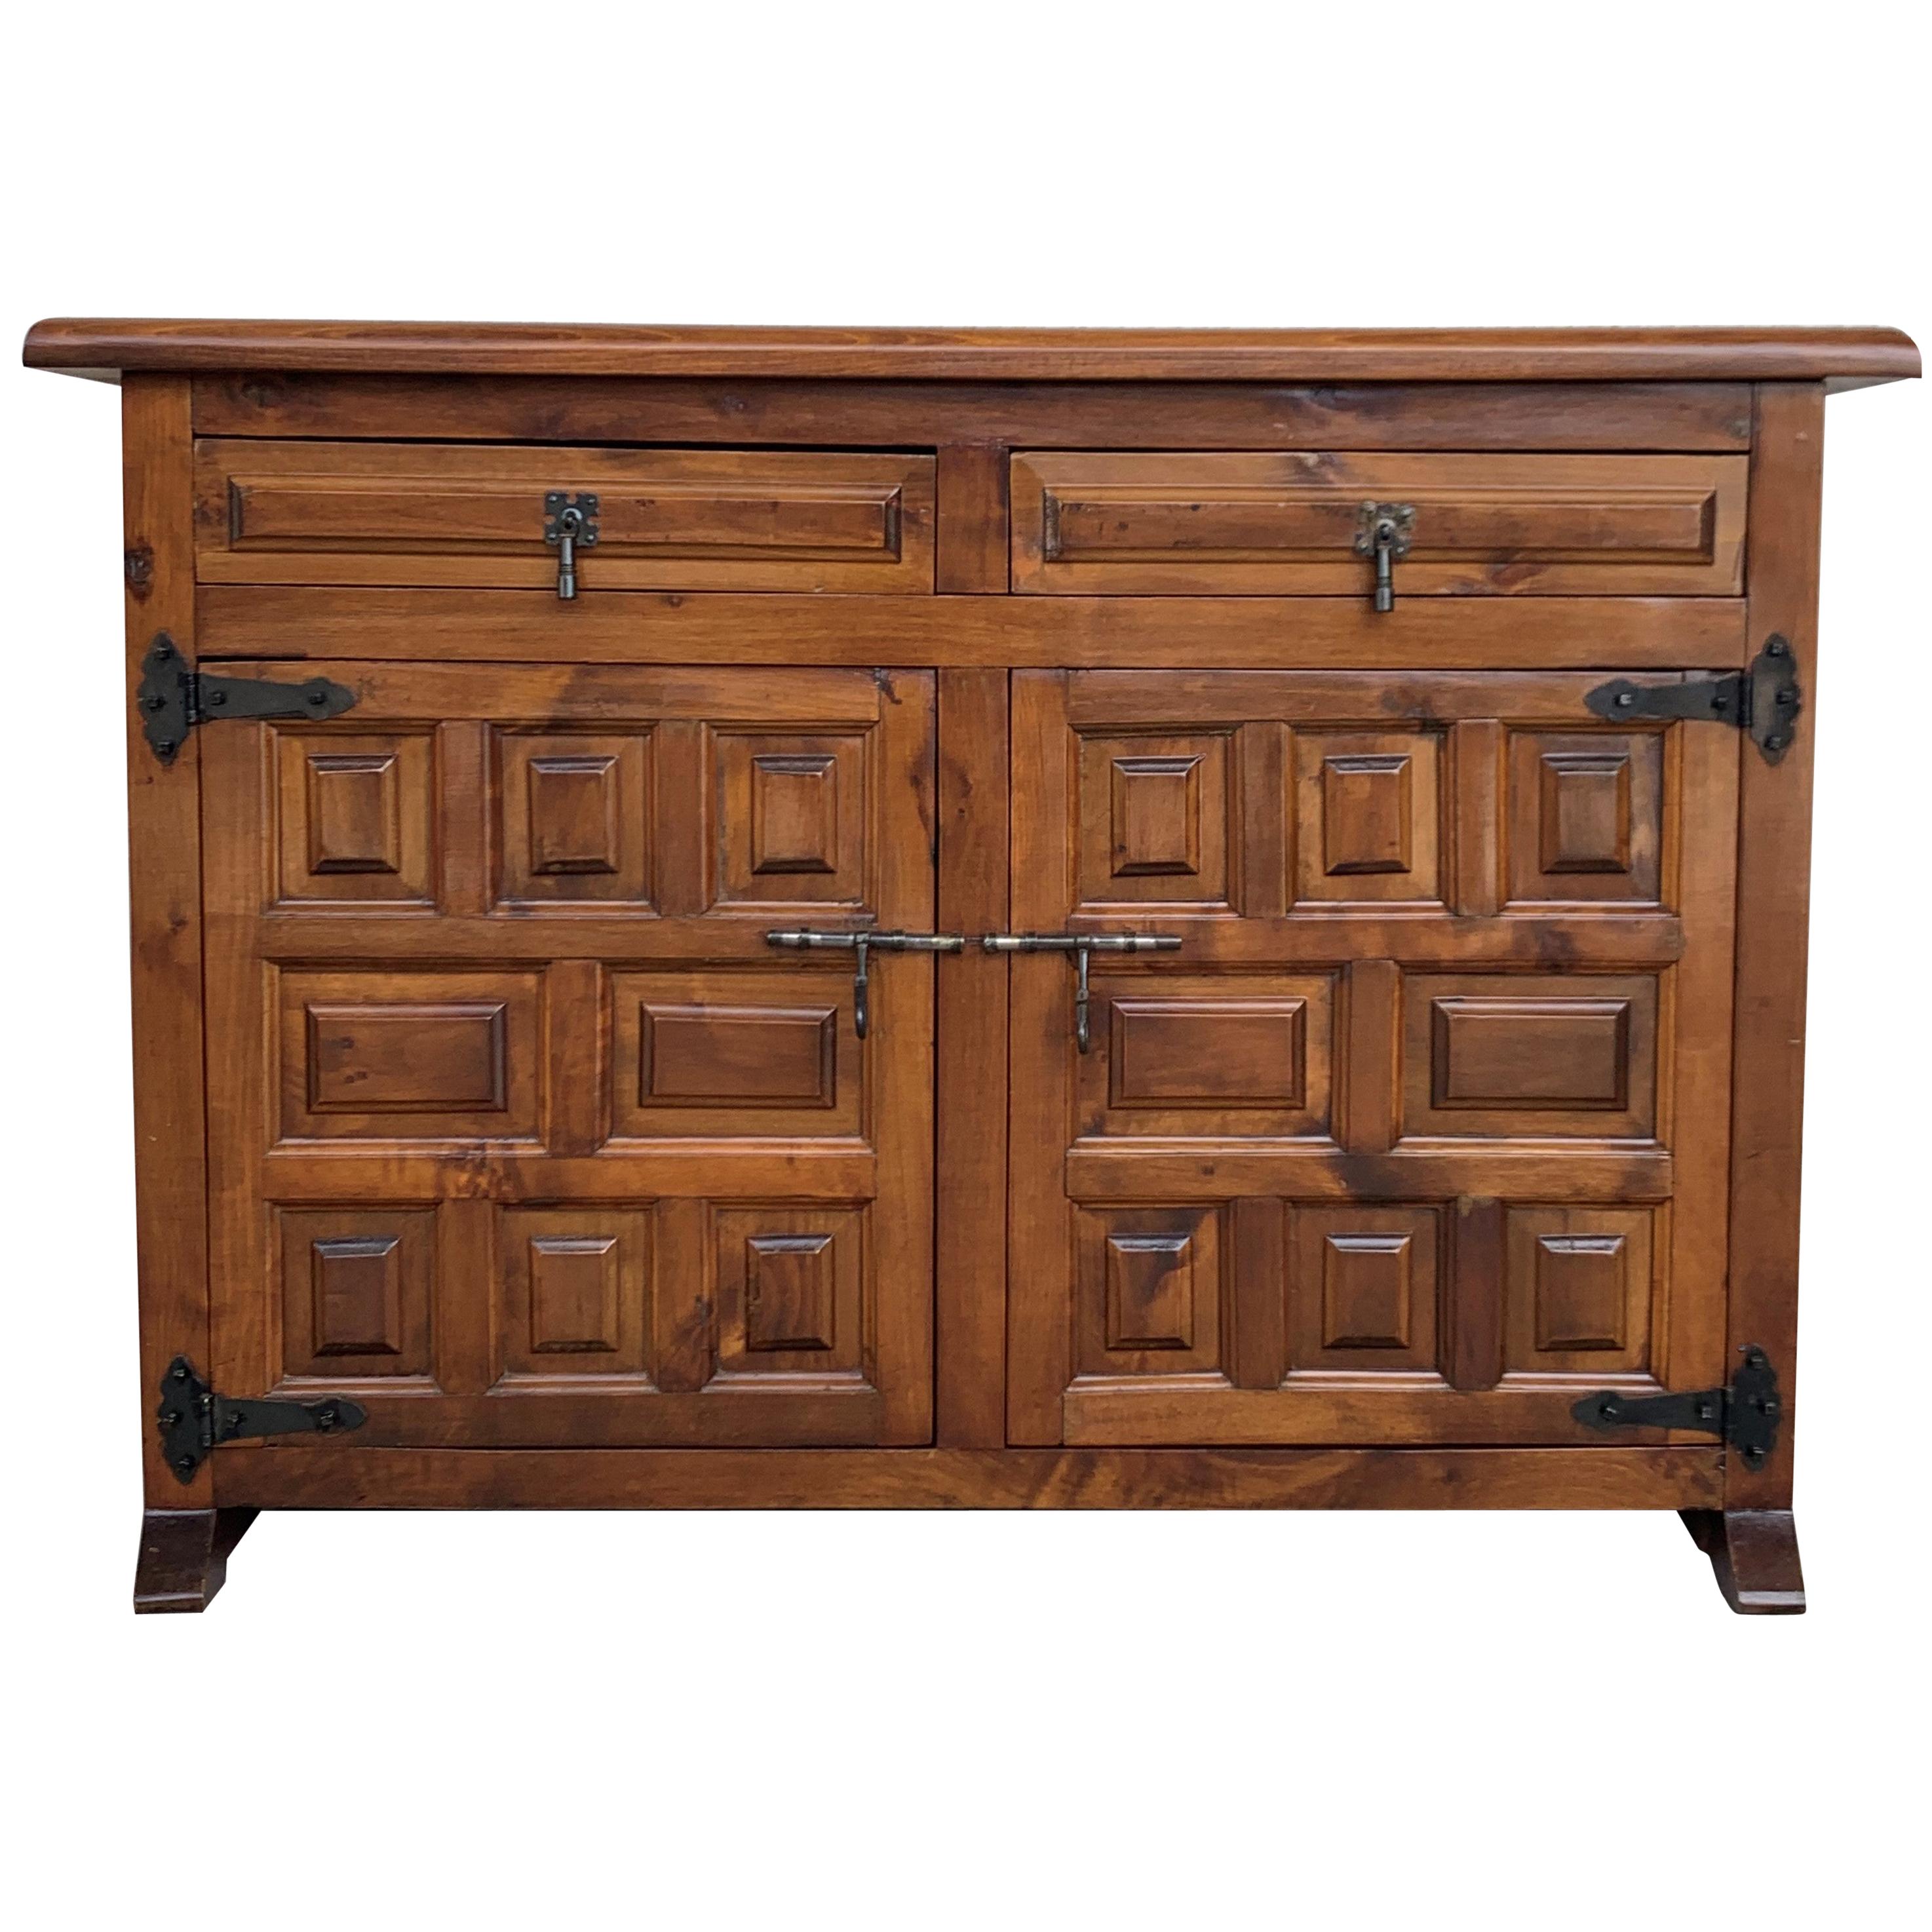 19th Catalan Spanish Baroque Carved Walnut Tuscan Two Drawers Credenza or Buffet